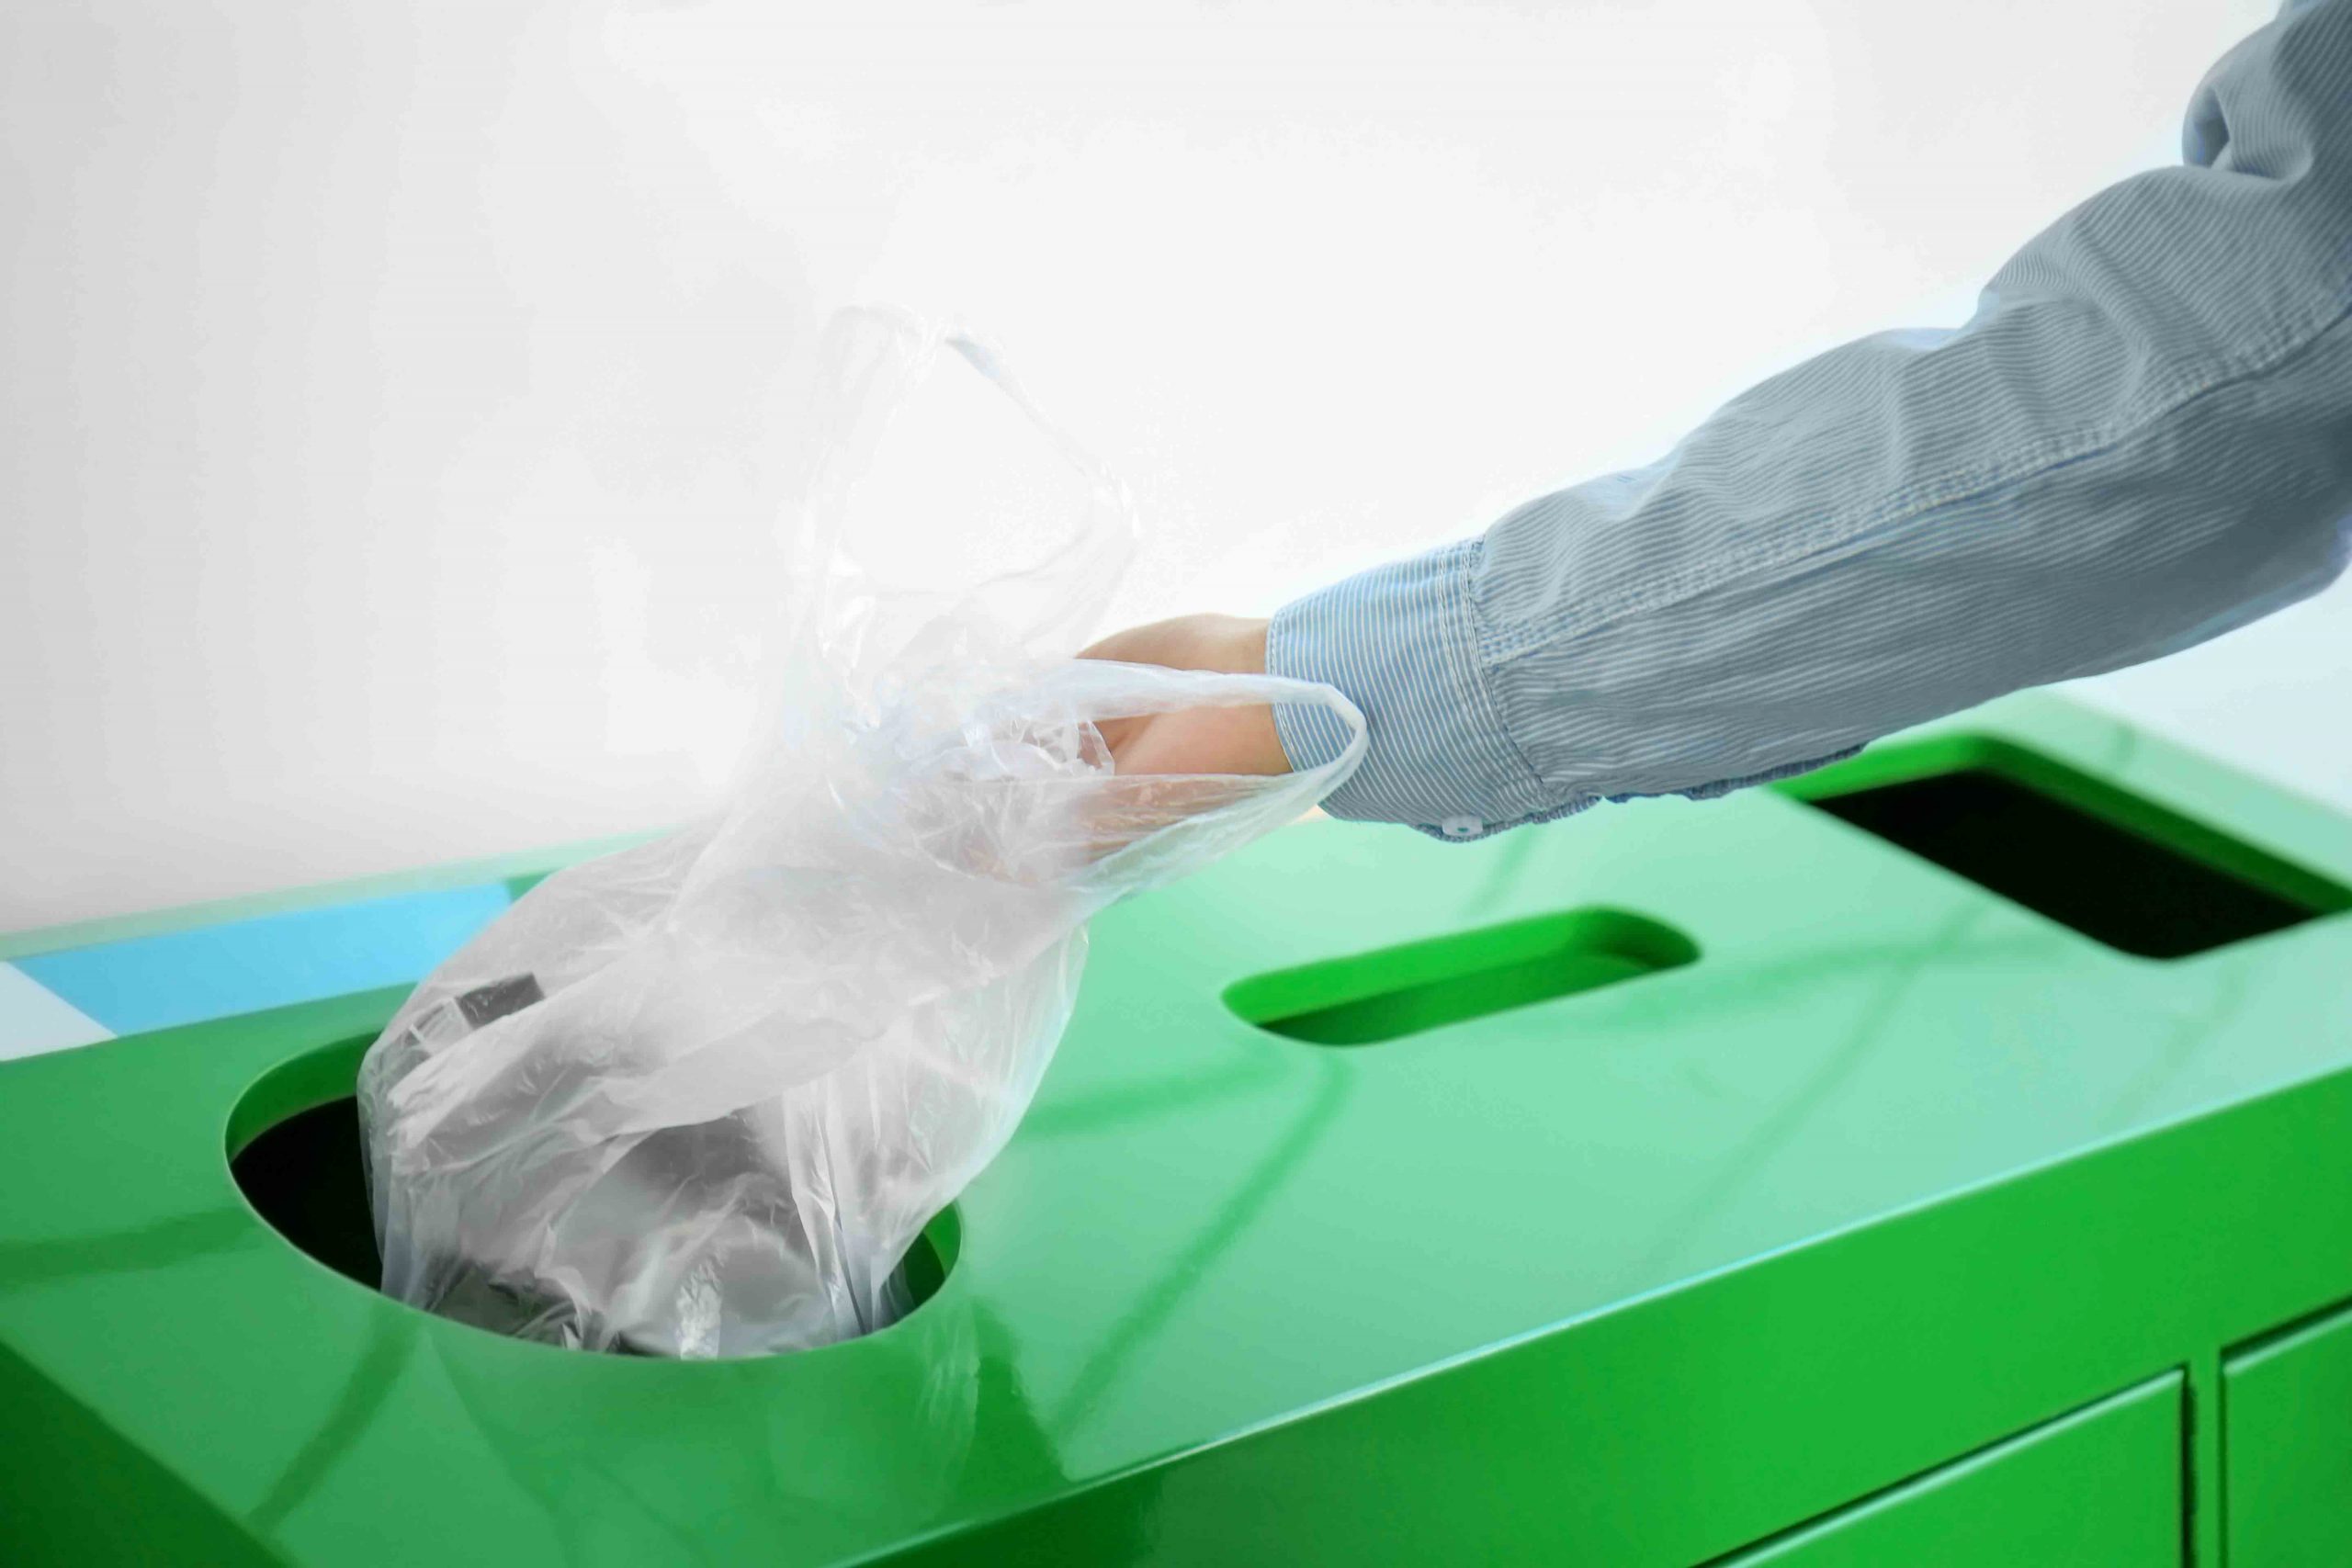 Learn how to recycle plastic bags into sturdy totes